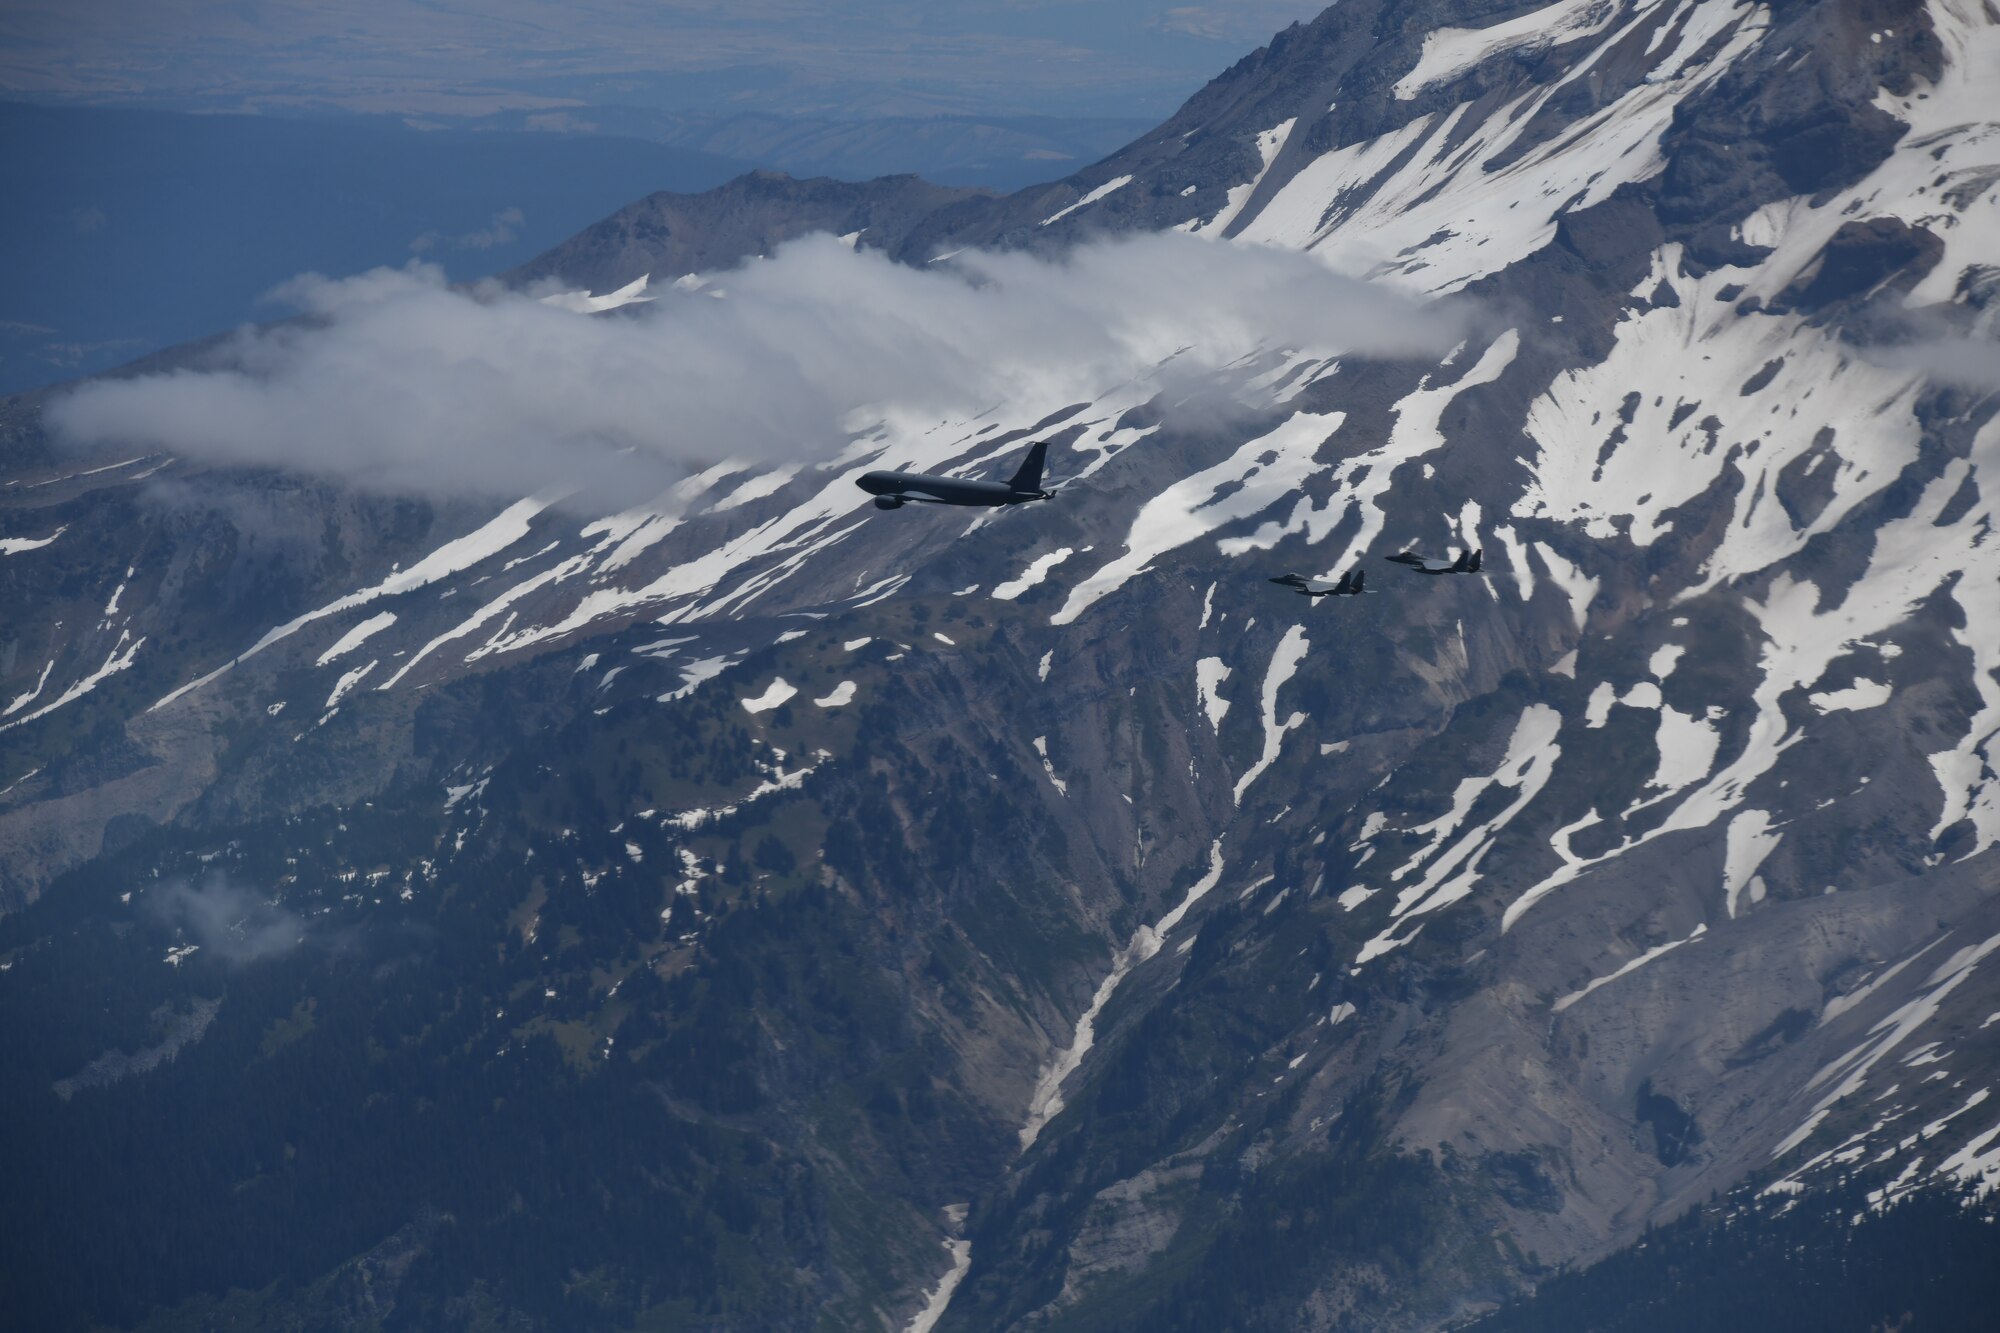 A U.S. Air Force KC-135 Stratotanker assigned to the 92nd Air Refueling Wing flies in formation with two F-15C Eagles from the 142nd Fighter Wing over Mount Rainier during Operational Centennial Contact June 27, 2023. Operation Centennial Contact, a movement which included flights over Yellowstone National Park, Mount Rushmore and Glacier National Park, was part of Air Mobility Command’s celebration of 100 years air refueling operations and demonstrated the 92nd Air Refueling Wing’s global reach capabilities. Since its inception in 1923, air refueling has become a crucial component of military and civilian aviation operations around the world by extending the range and endurance of aircraft and enabling them to complete missions that would otherwise be impossible or require multiple stops. As a result, this capability is essential for strategic and tactical operations, as well as humanitarian relief efforts in support of AMC, U.S. Transportation Command and Department of Defense priorities. (U.S. Air Force Photo by 1st Lt. Ariana Wilkinson)